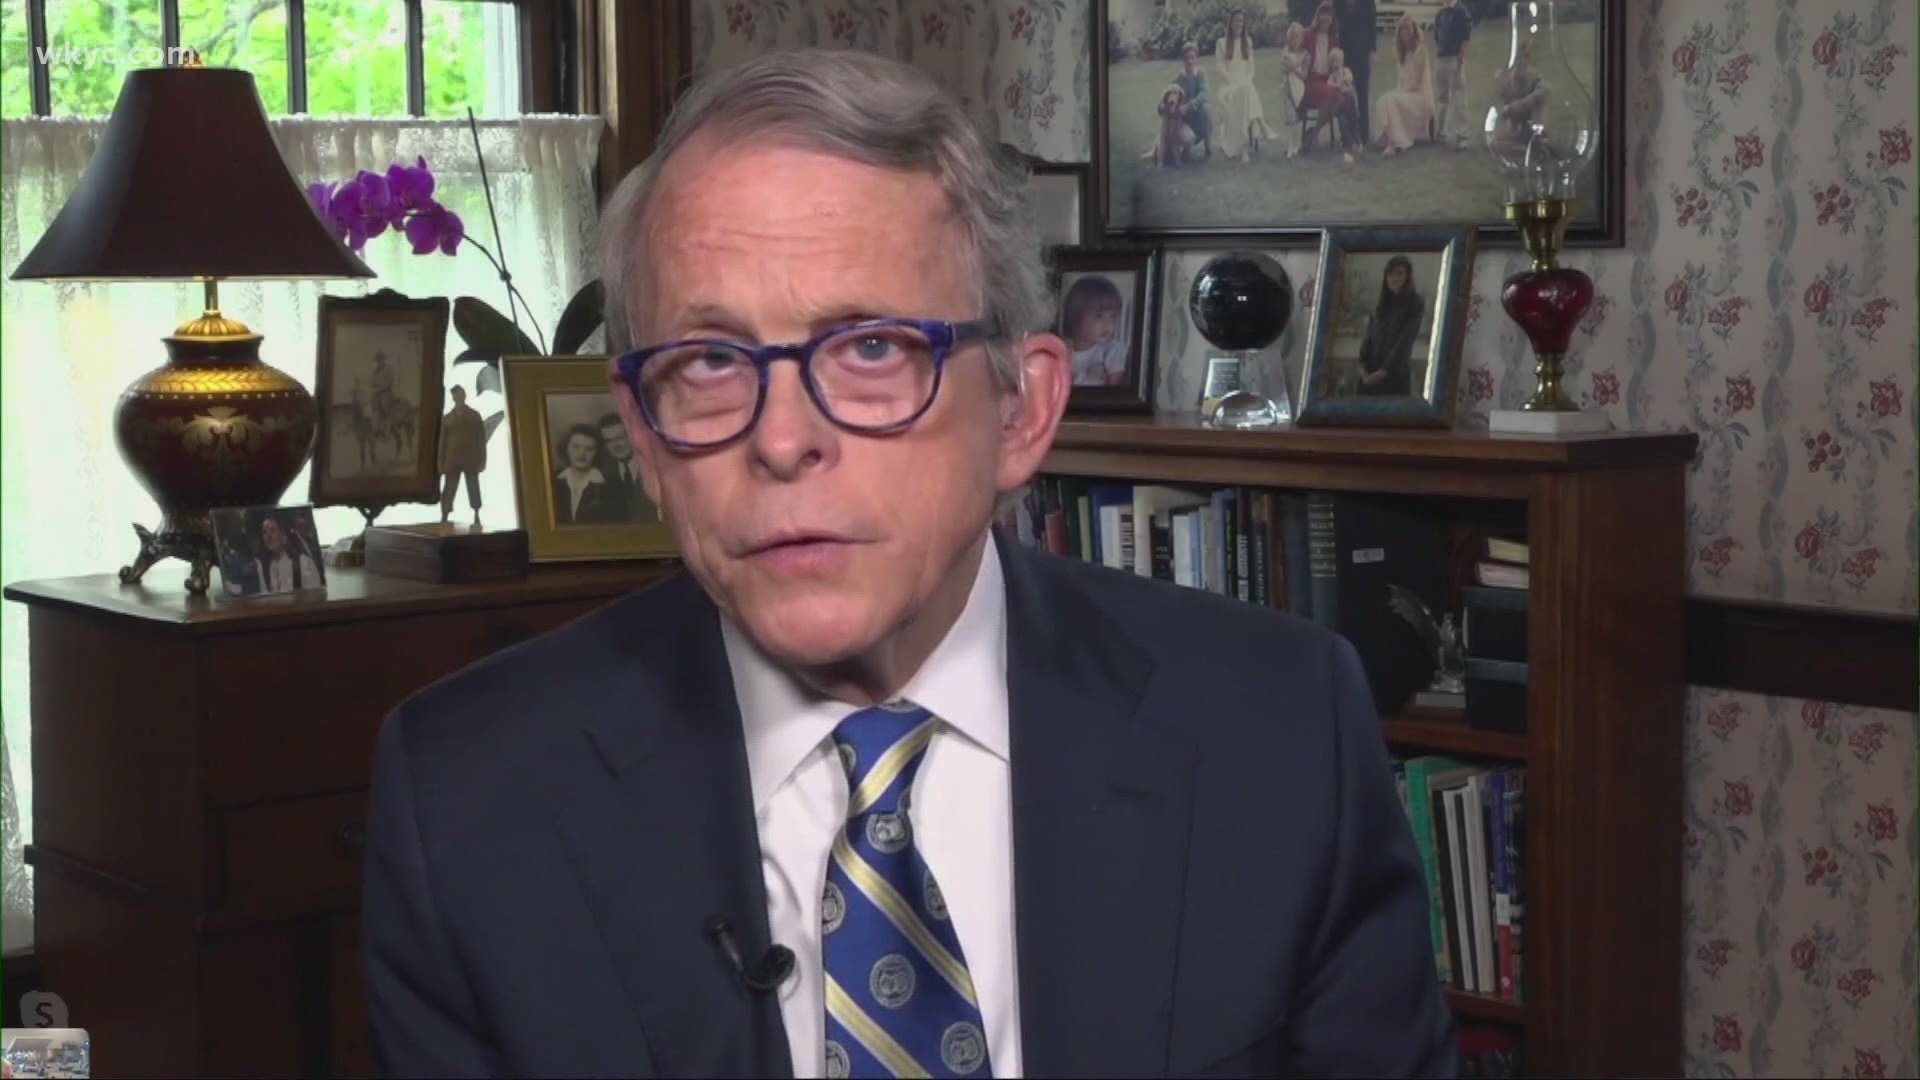 DeWine talked about COVID-19 testing availability, schools, daycares, and much more. Several of the state's businesses and services were reopened this week.